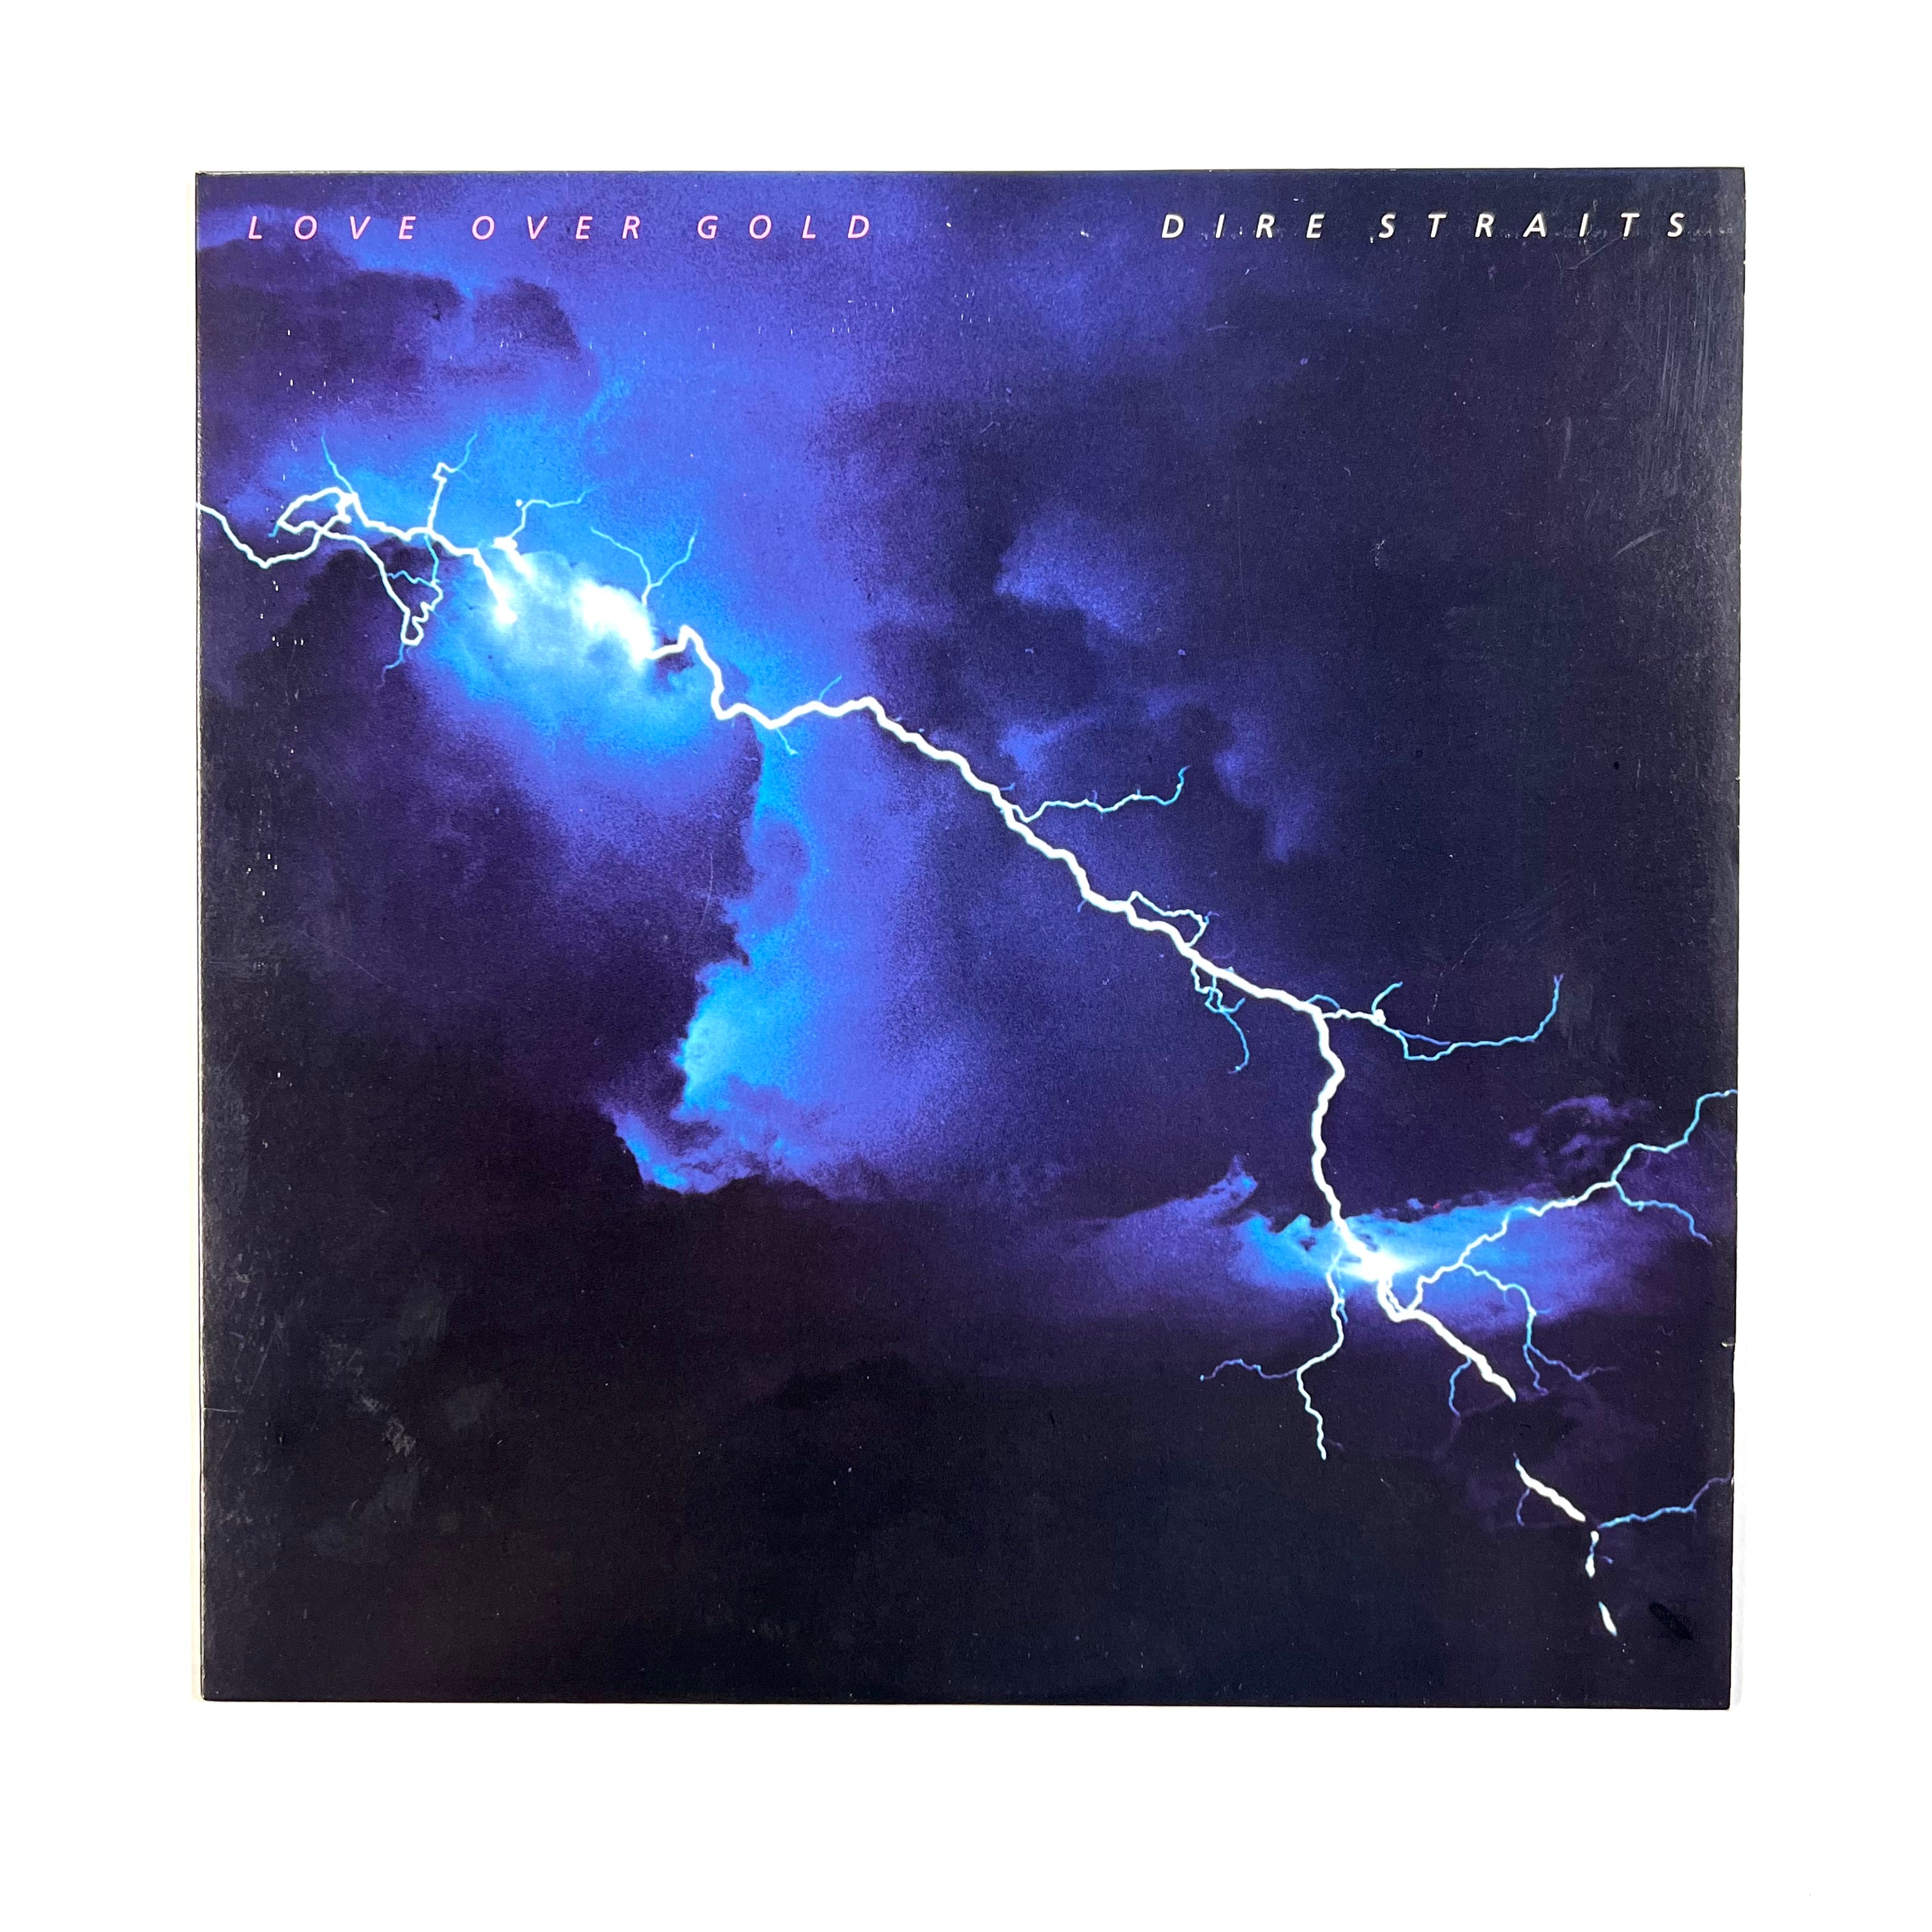 Dire straits Love Over Gold Vinyle - HIFI PROJECT